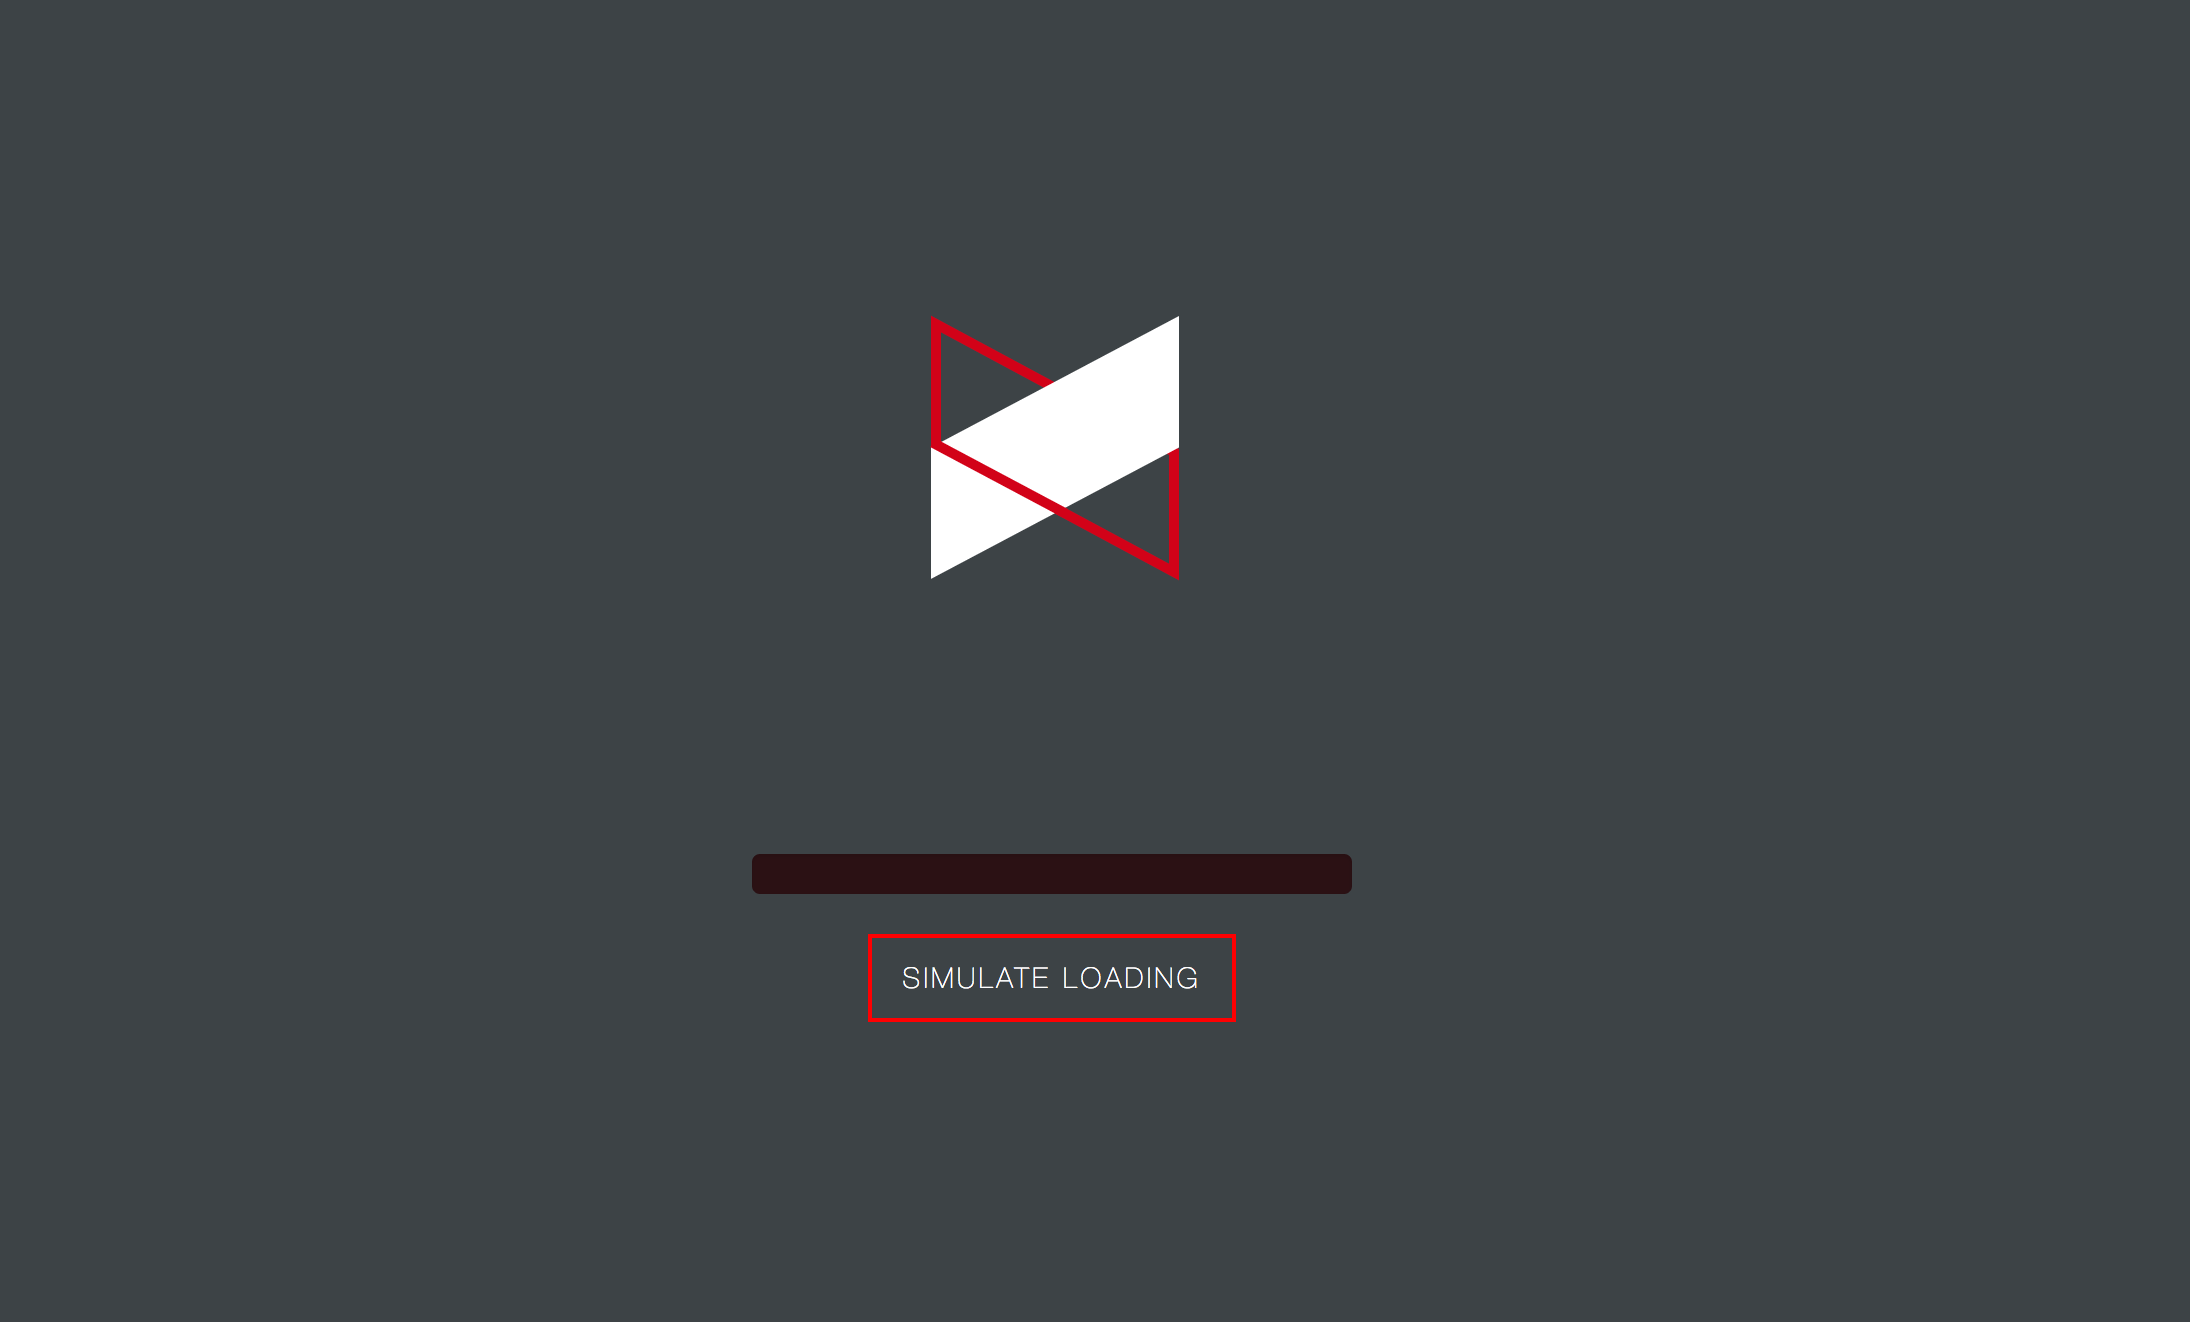 If MKBHD had a loading animation